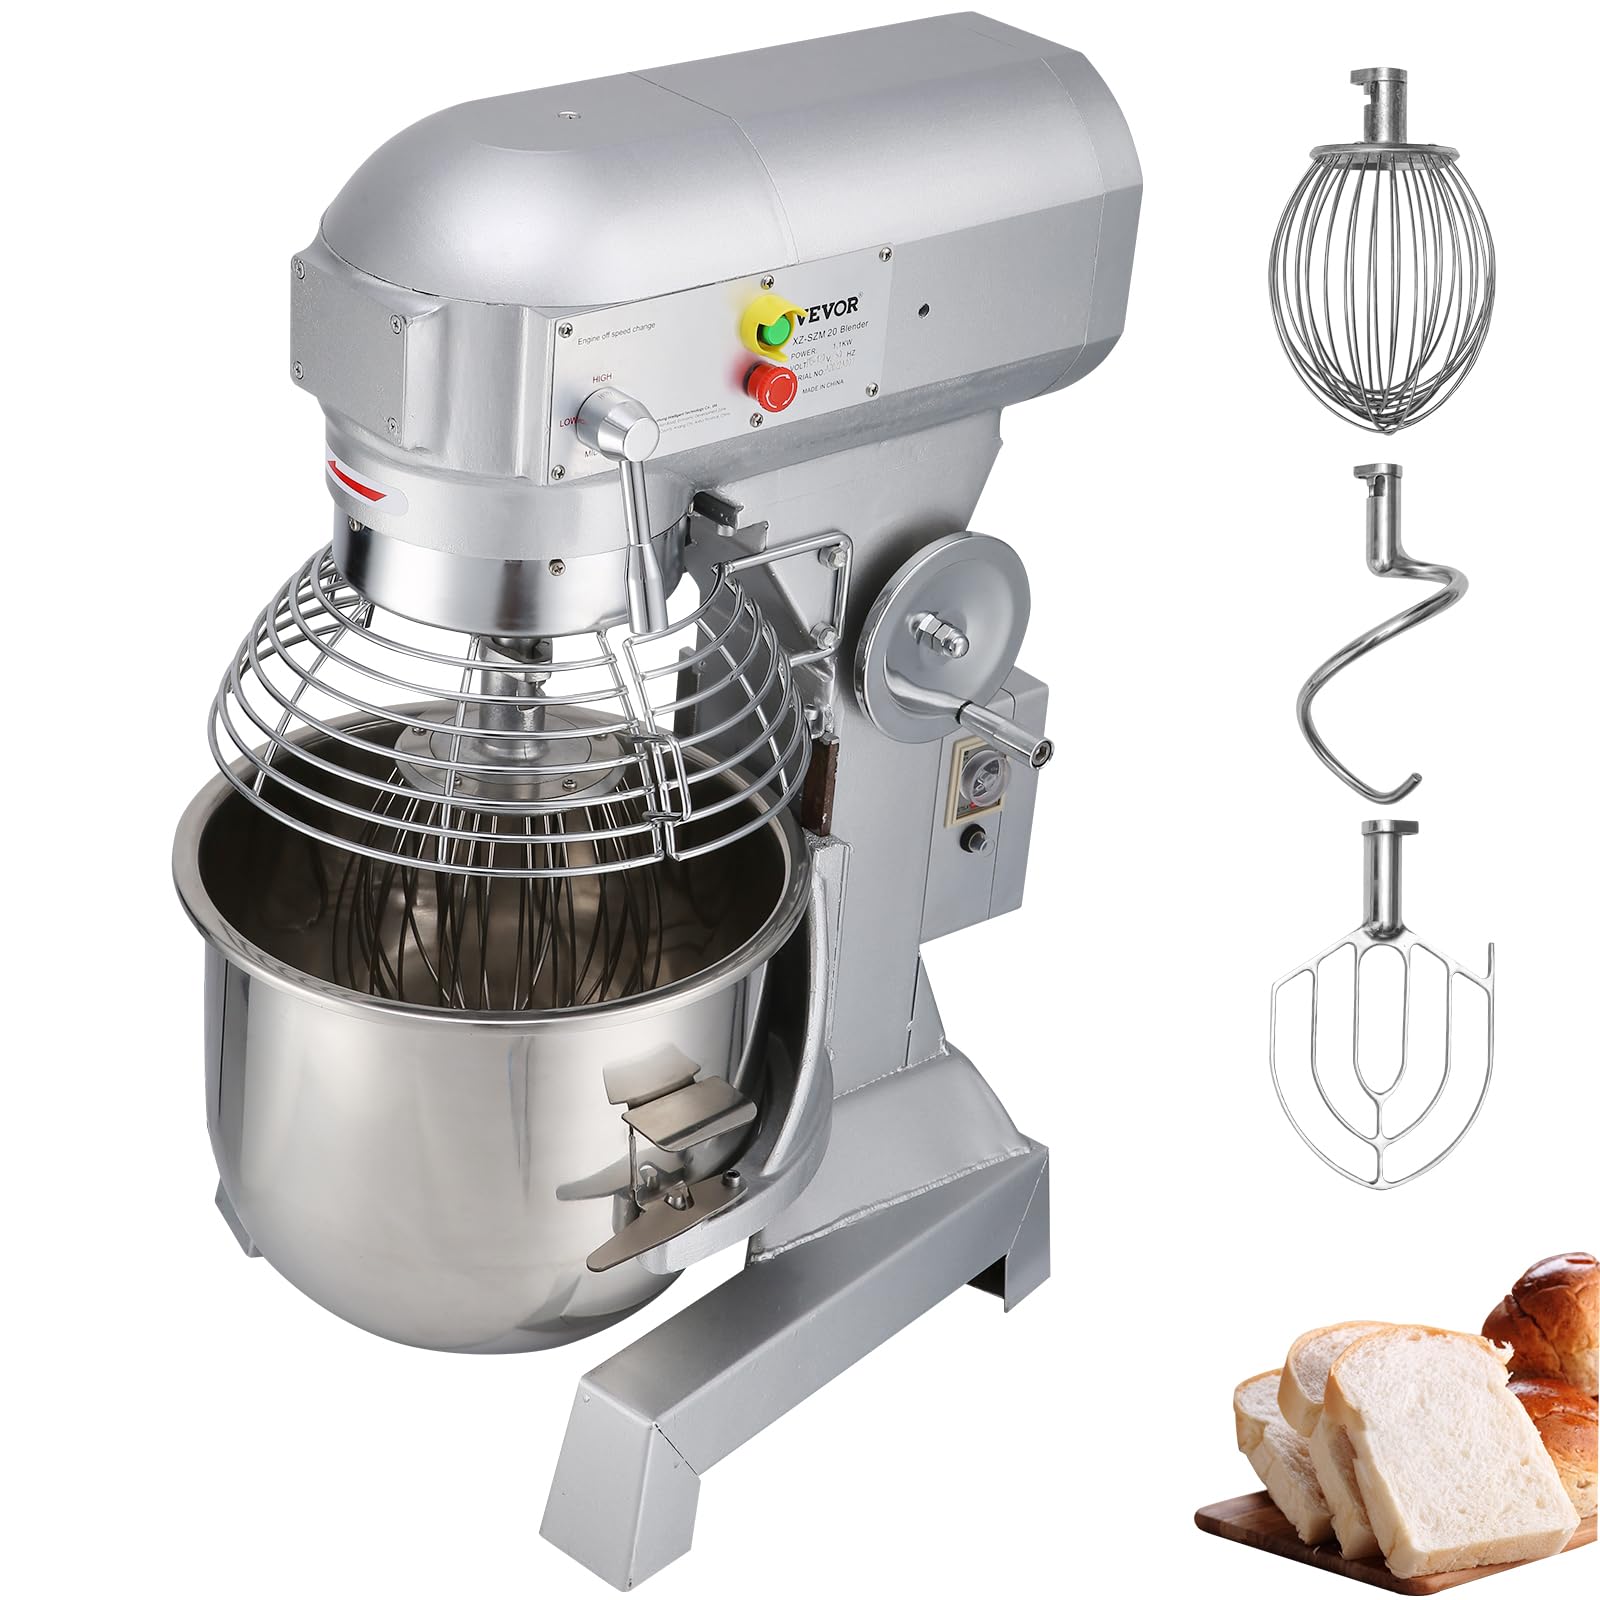 VEVOR Commercial Electric Food Mixer 15Qt Stand Machine Dough Mixer 3 Speed 600W от Vevor Many GEOs